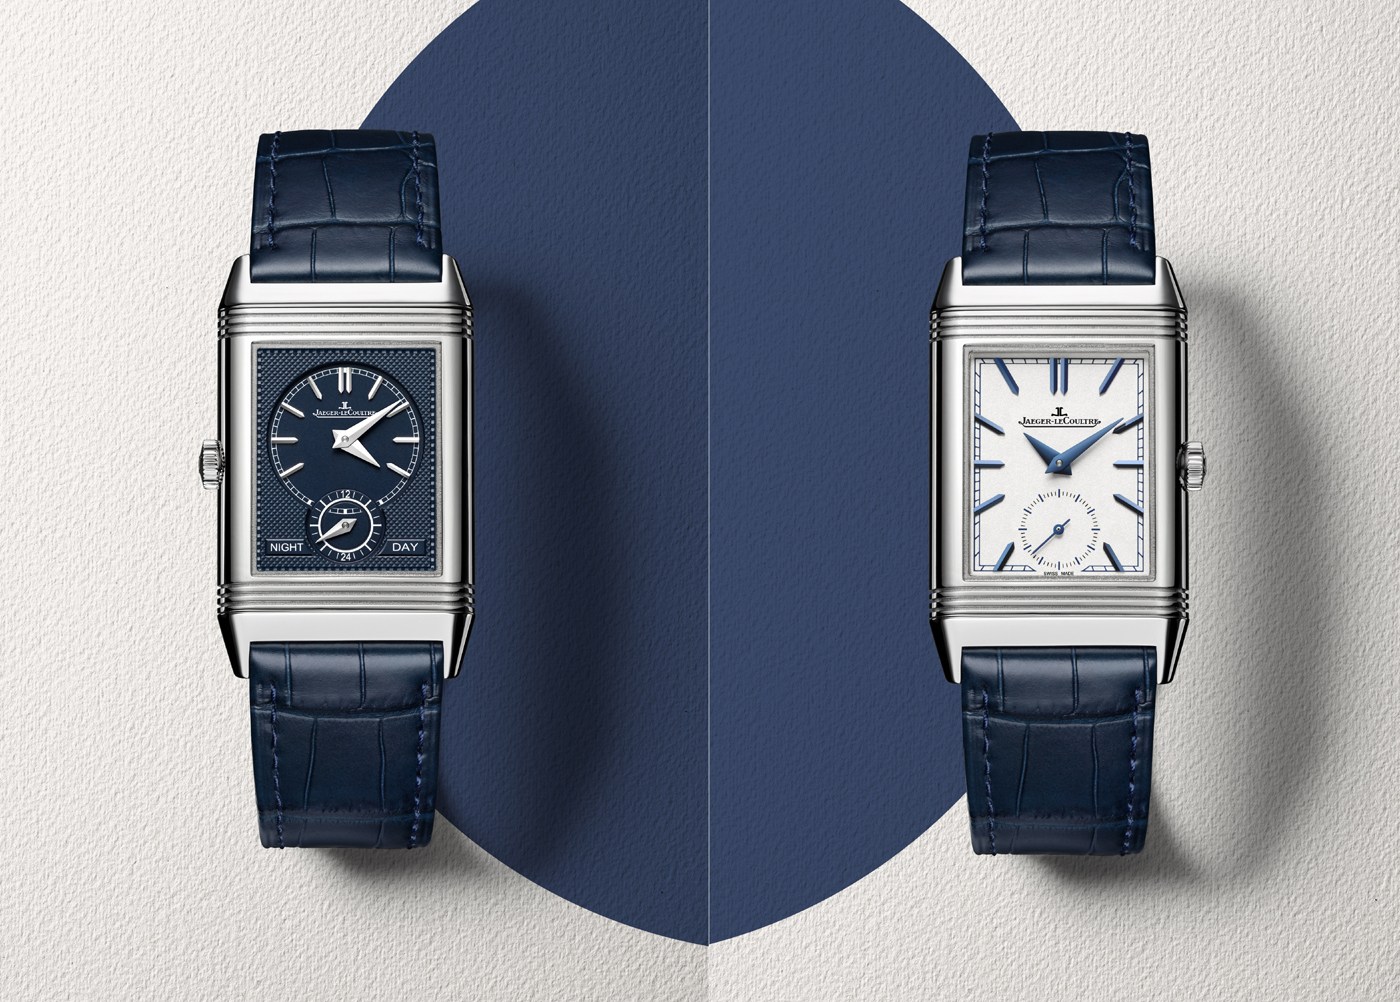 Jaeger-LeCoultre-Reverso-SIHH-2016-Reverso-Tribute-Duo